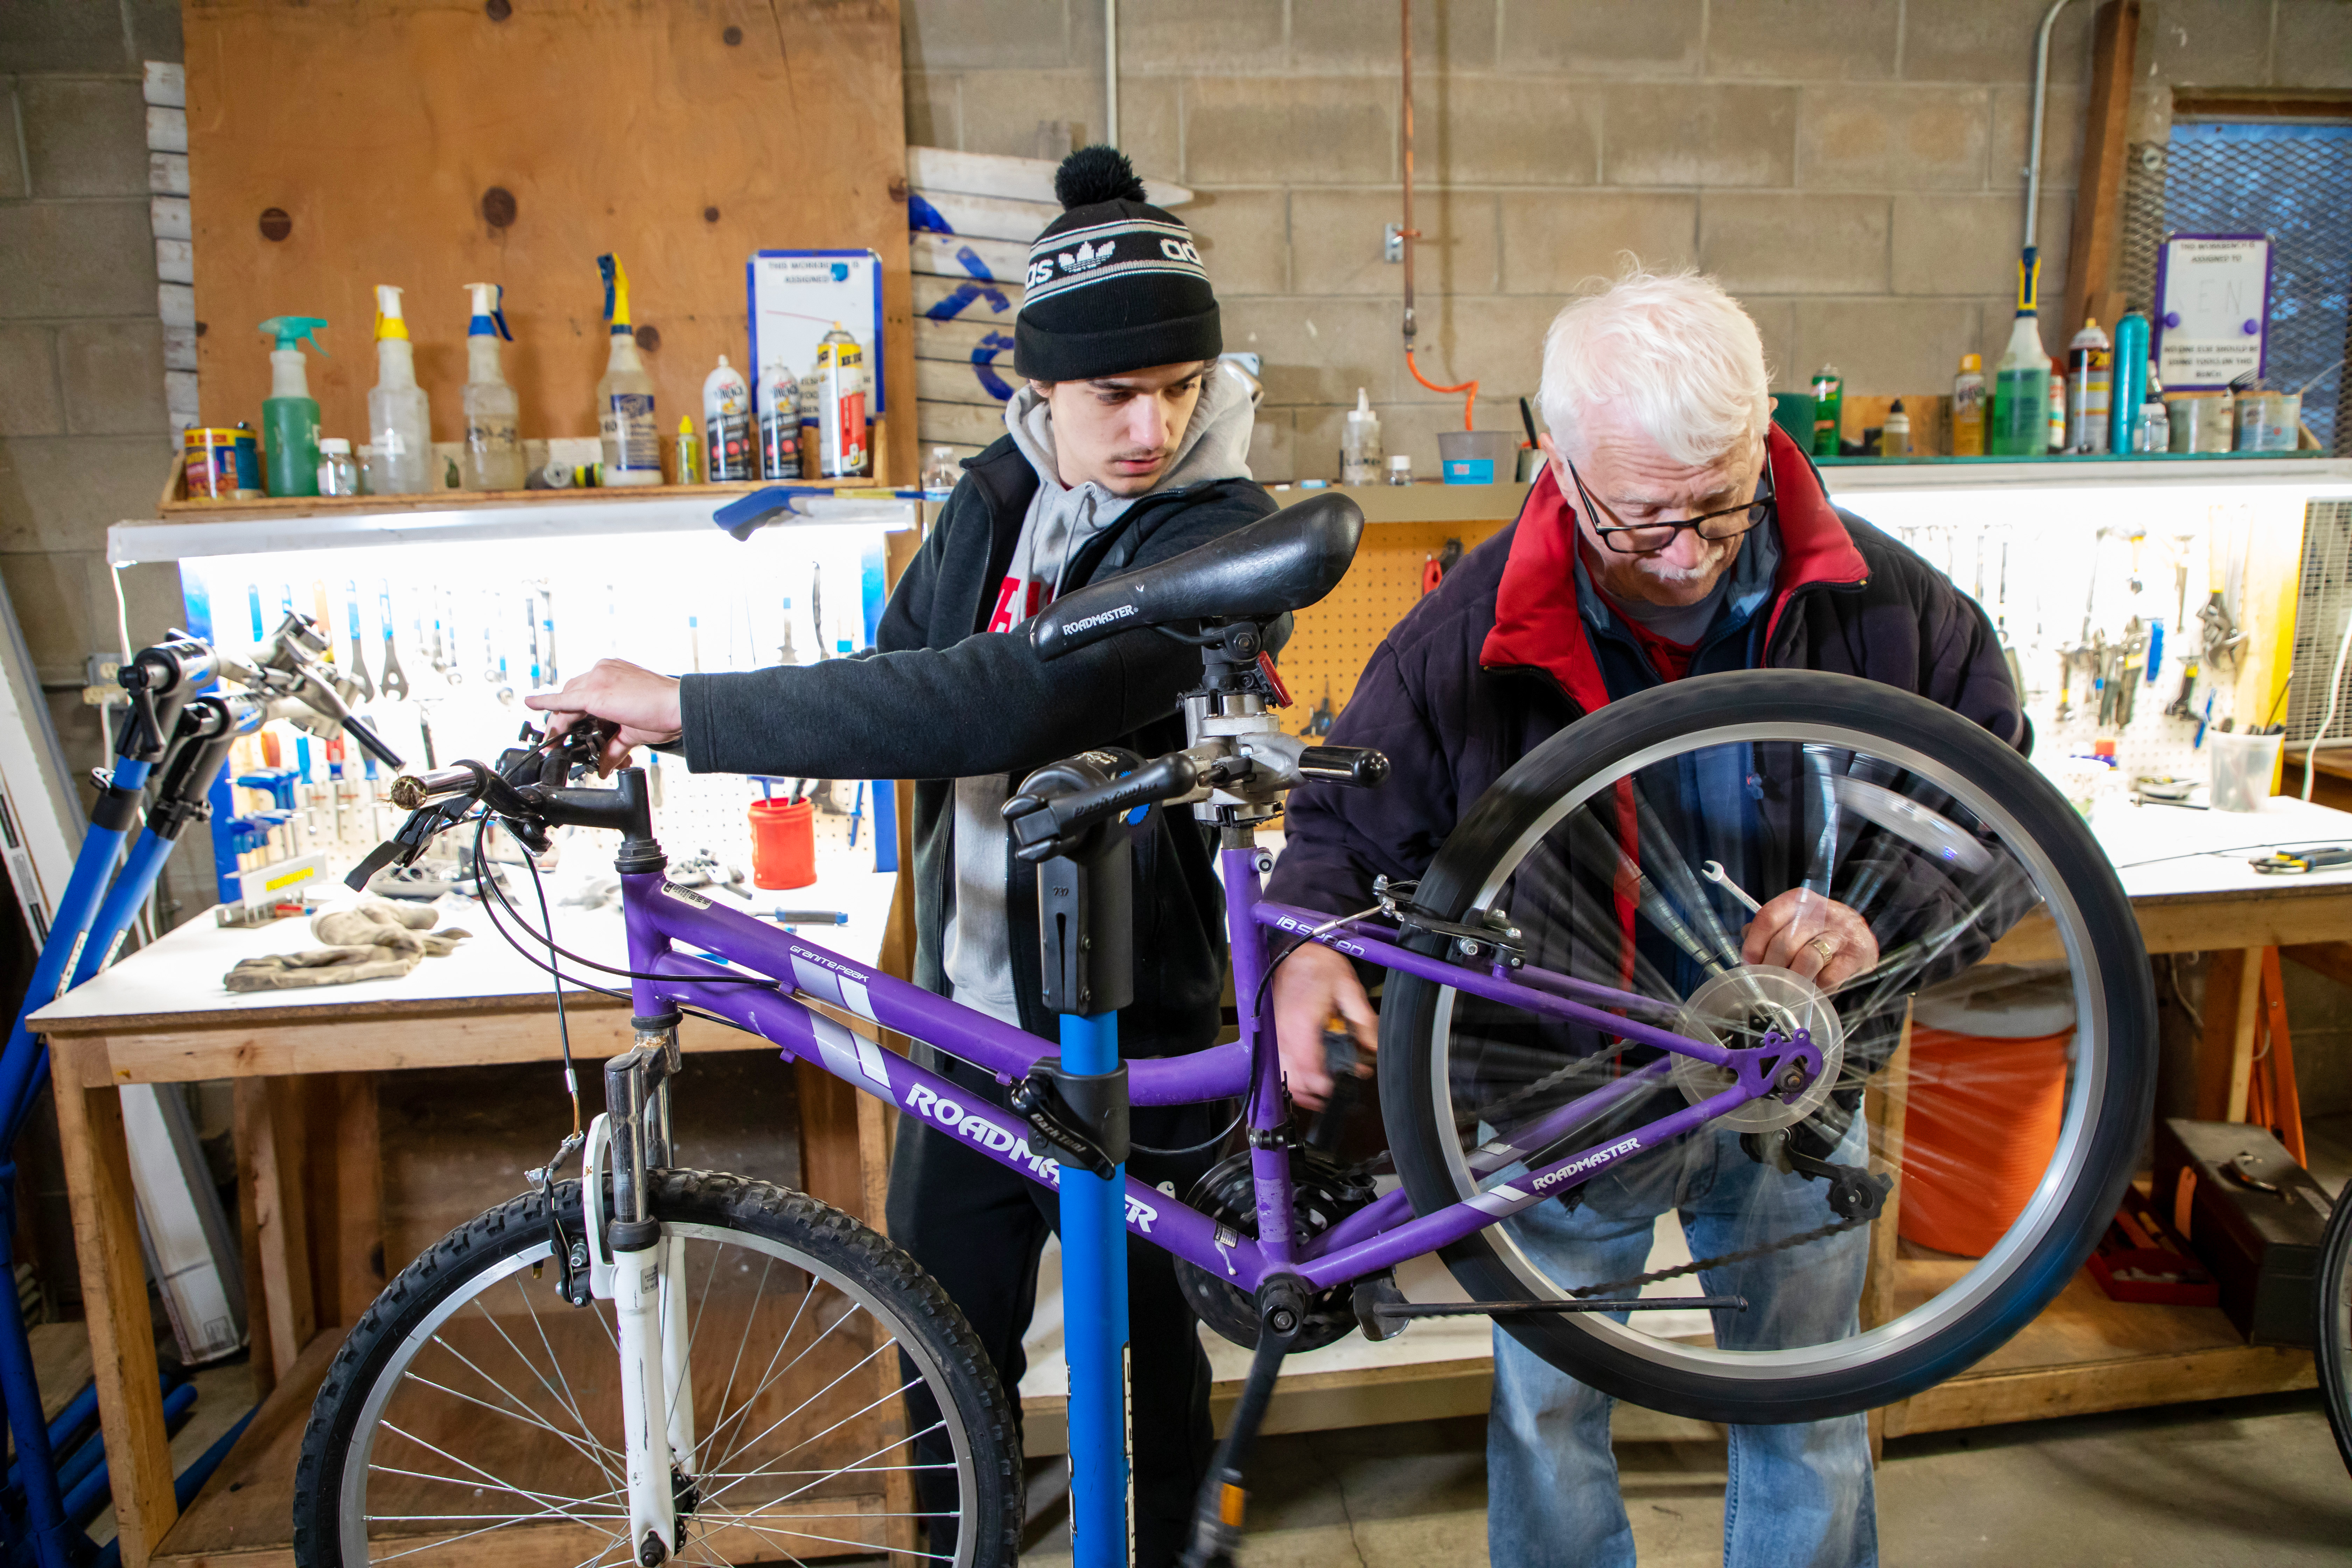 Two people working on bicycle.